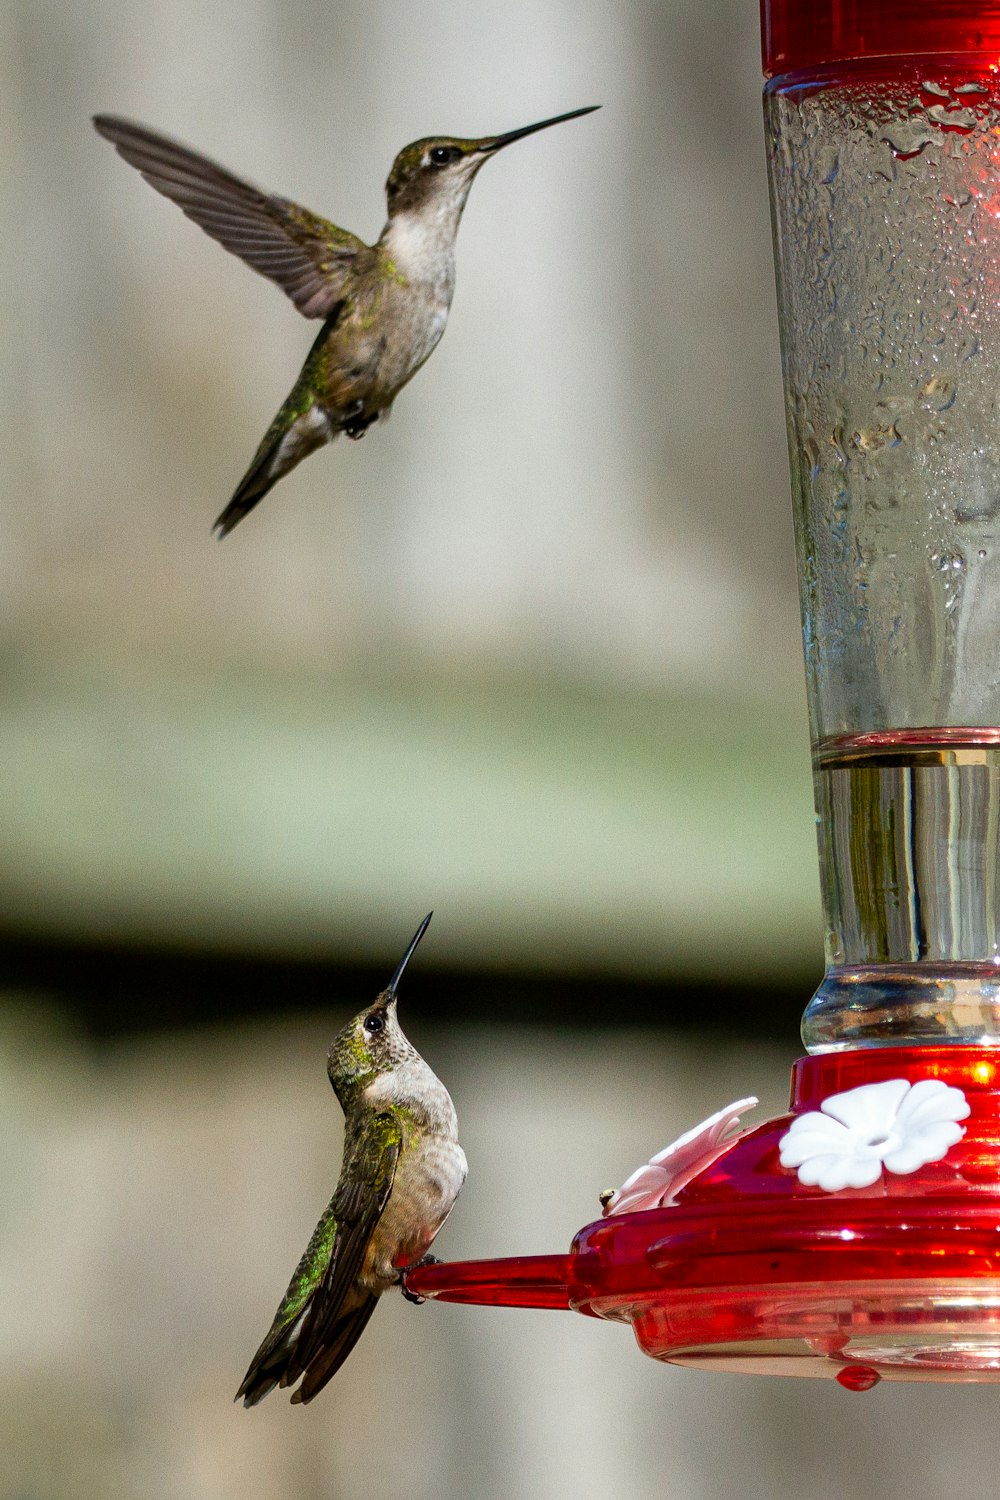 brown humming bird flying on mid air during daytime